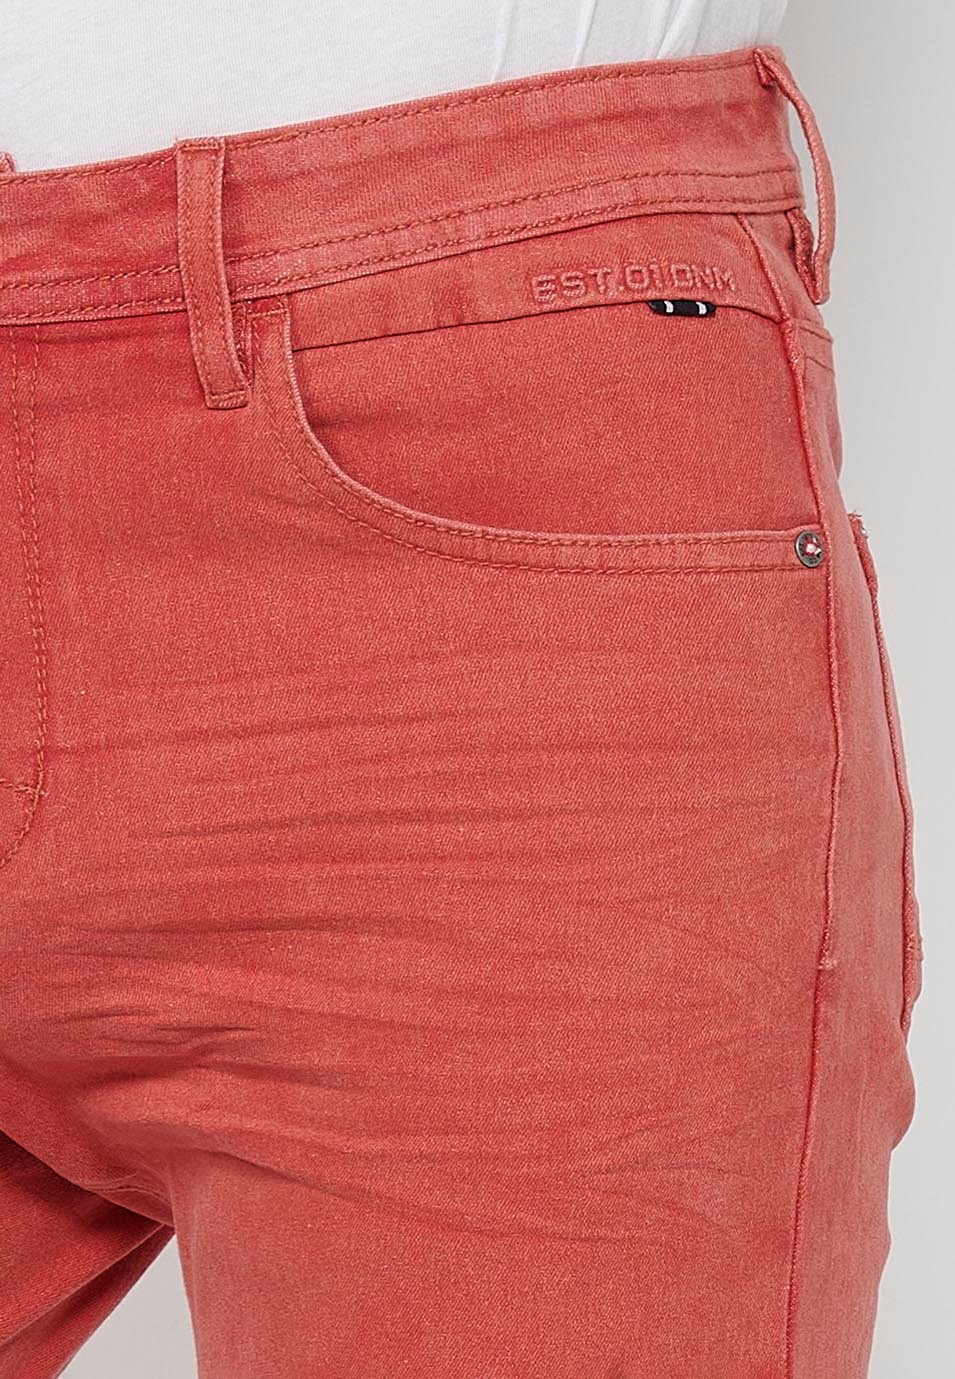 Shorts with a turn-up finish with front zipper and button closure and five pockets, one with a match pocket, in Red for Men 5